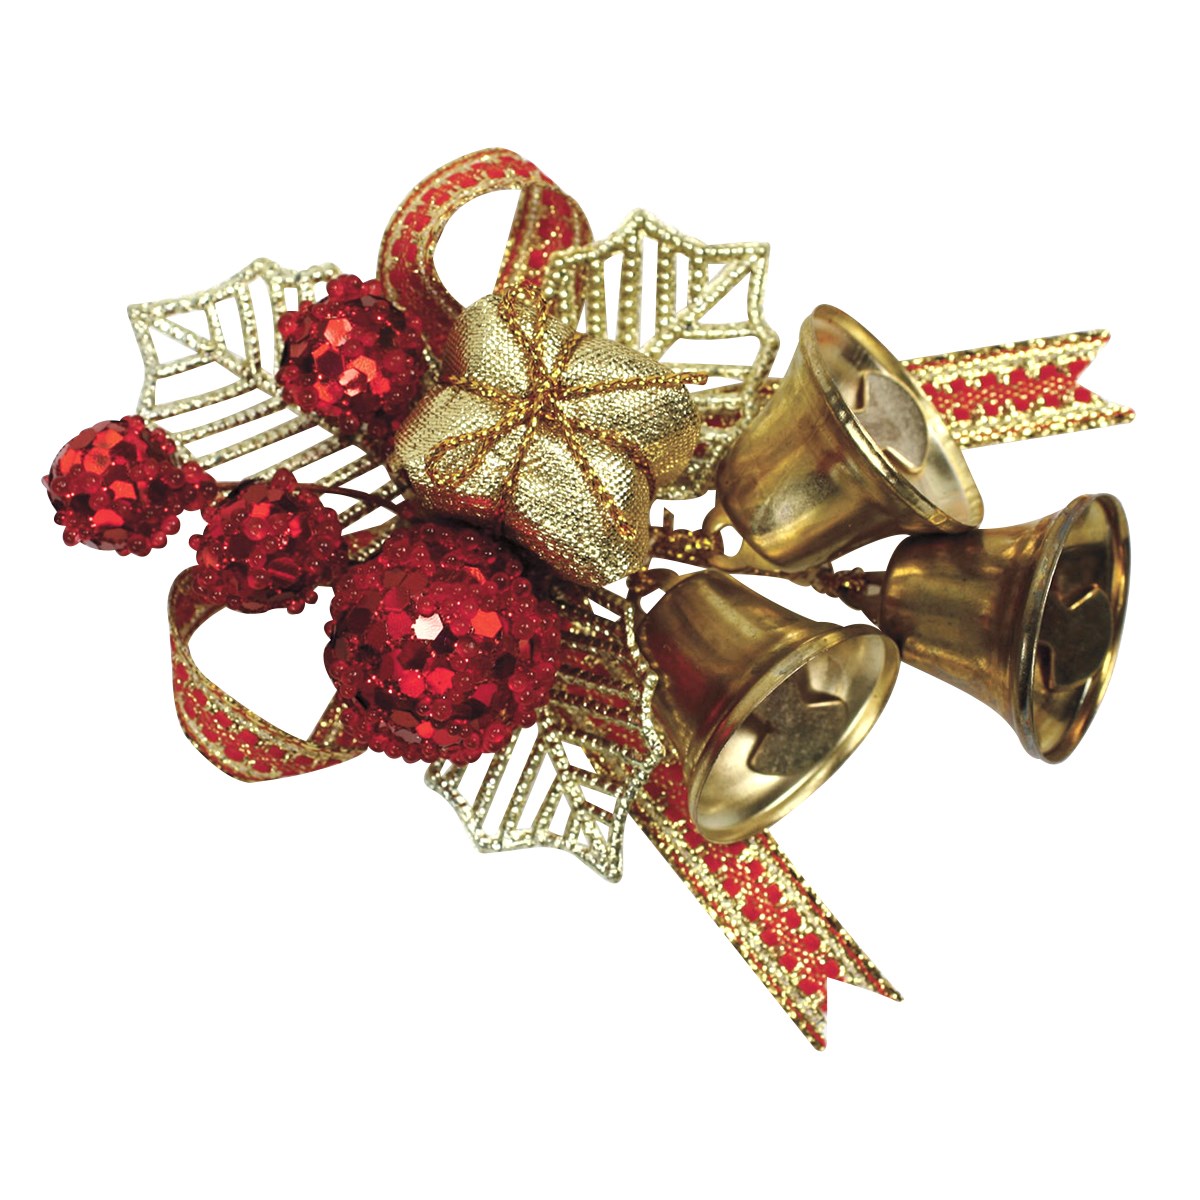 Gold Holly and Bells Christmas Decorations - perfect for cake and craft